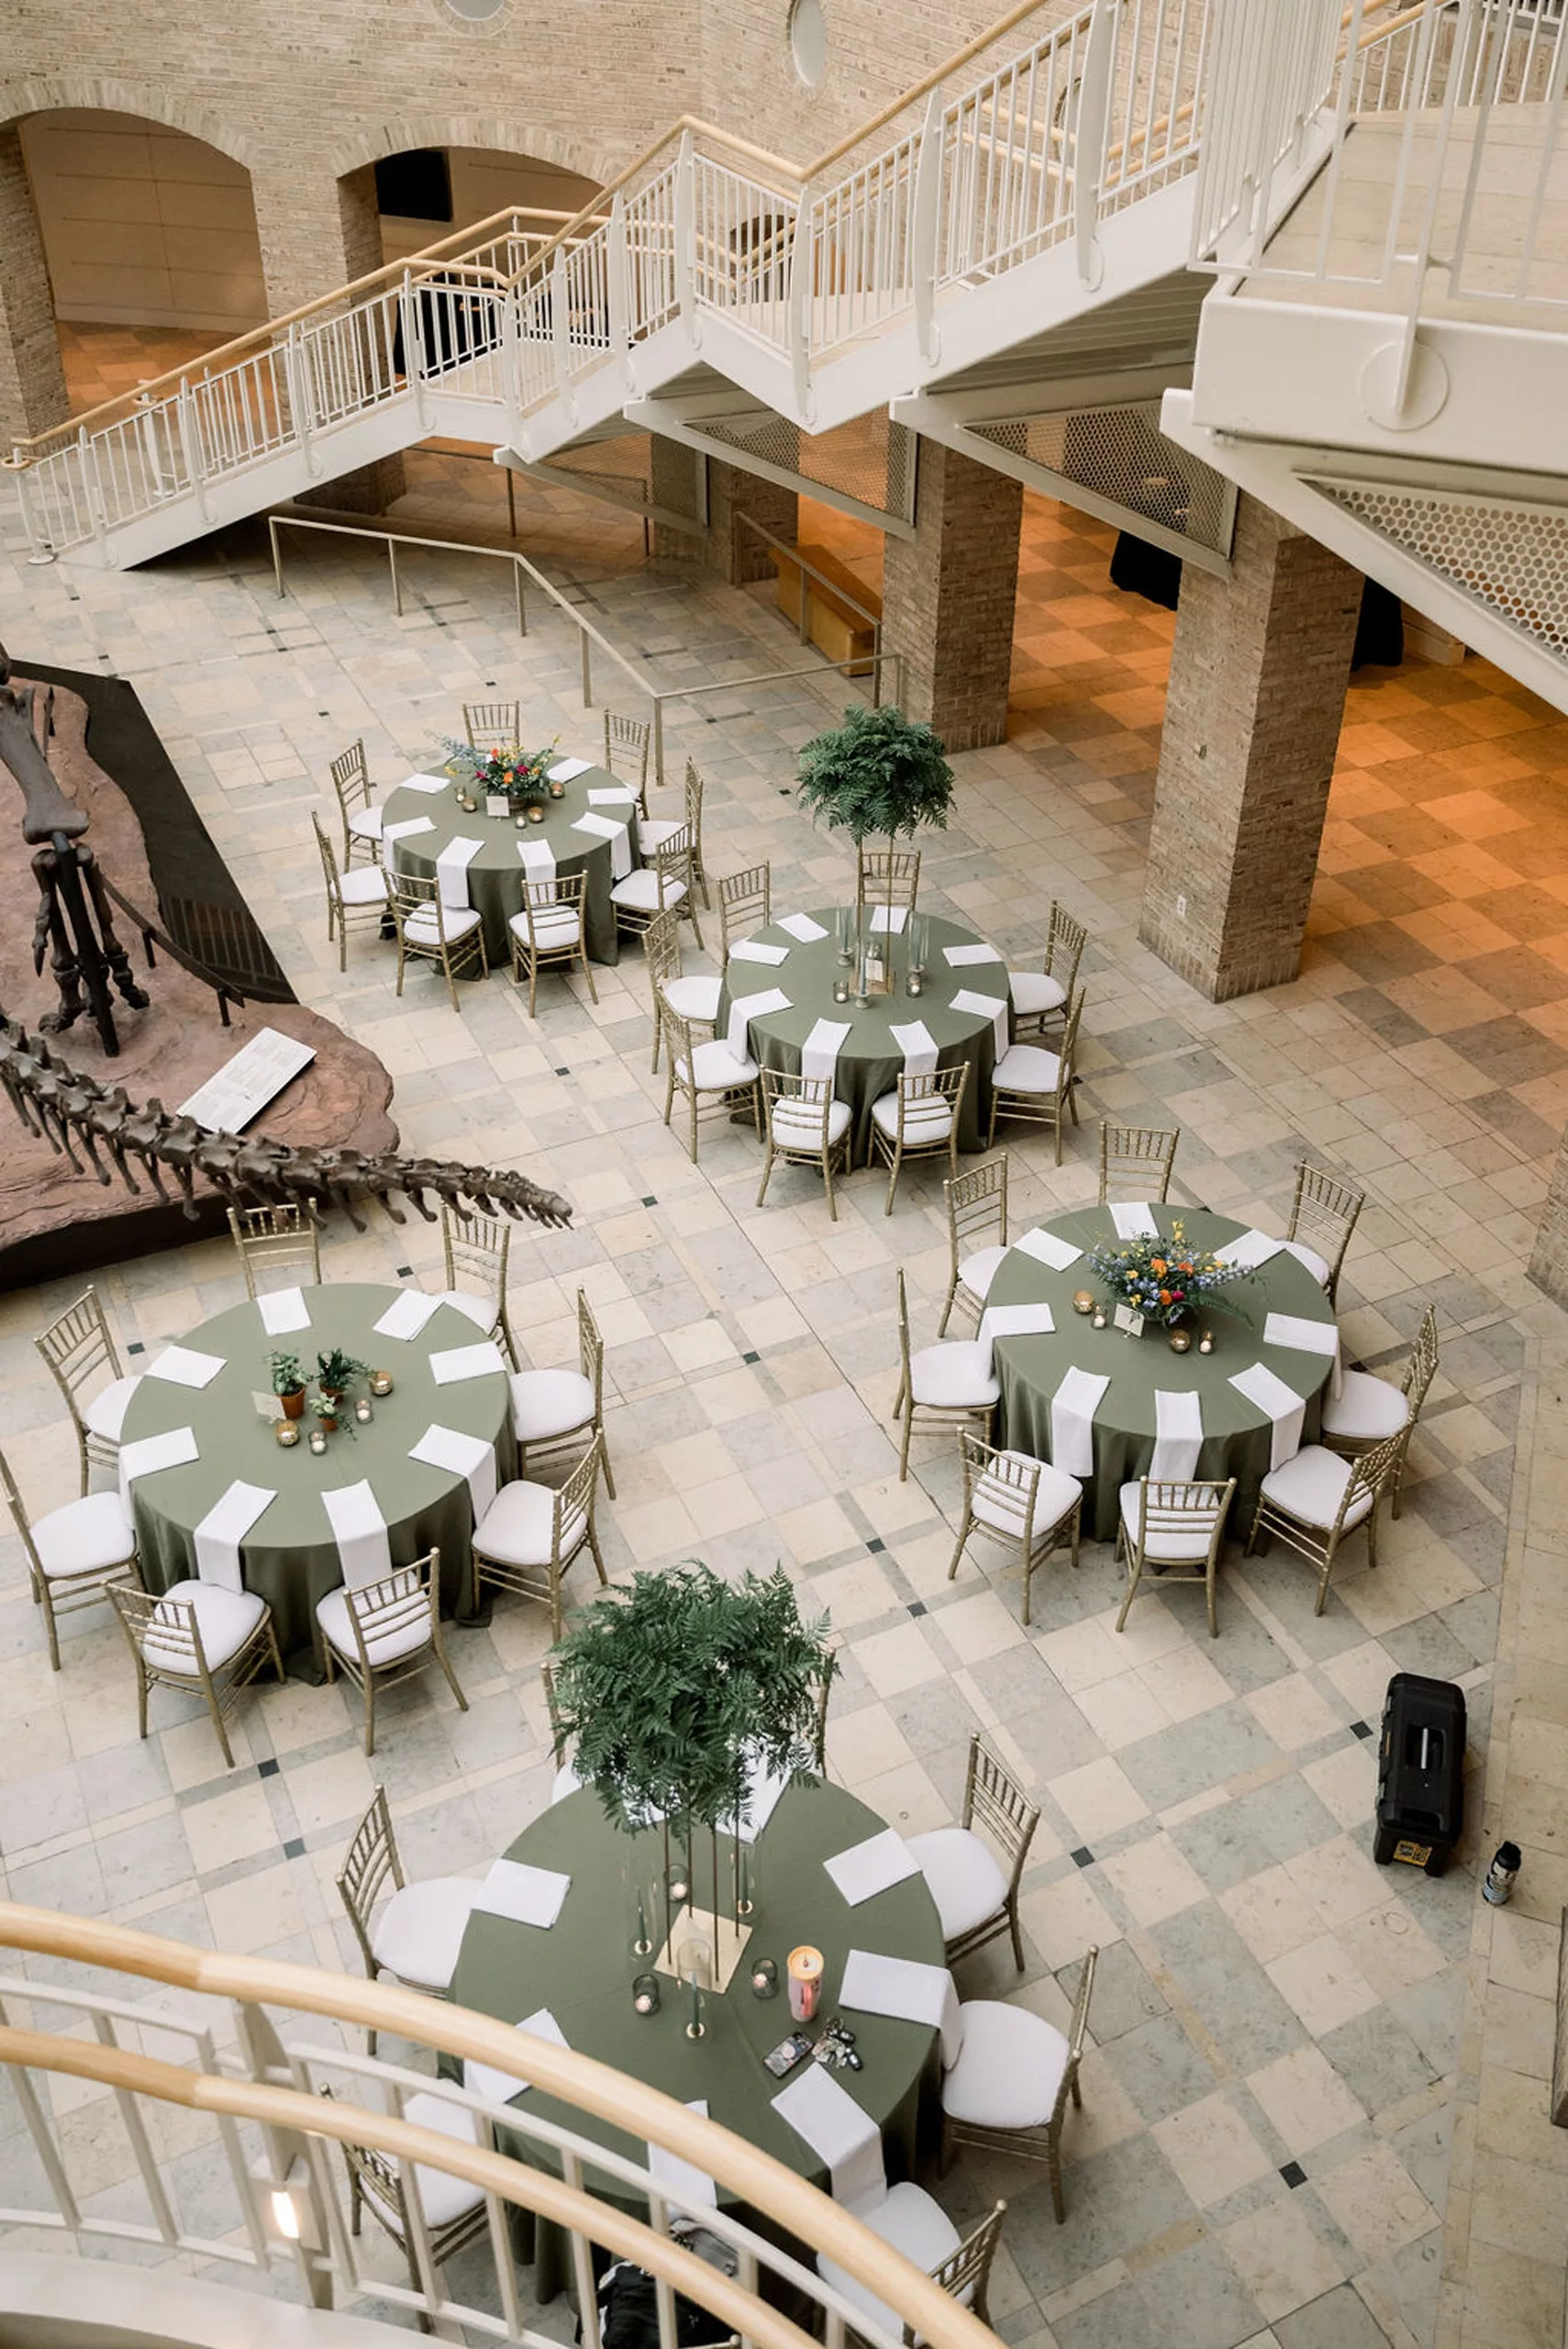 Details of wedding ceremony table set up with green linen under a dinosaur skeleton at a jurassic park wedding